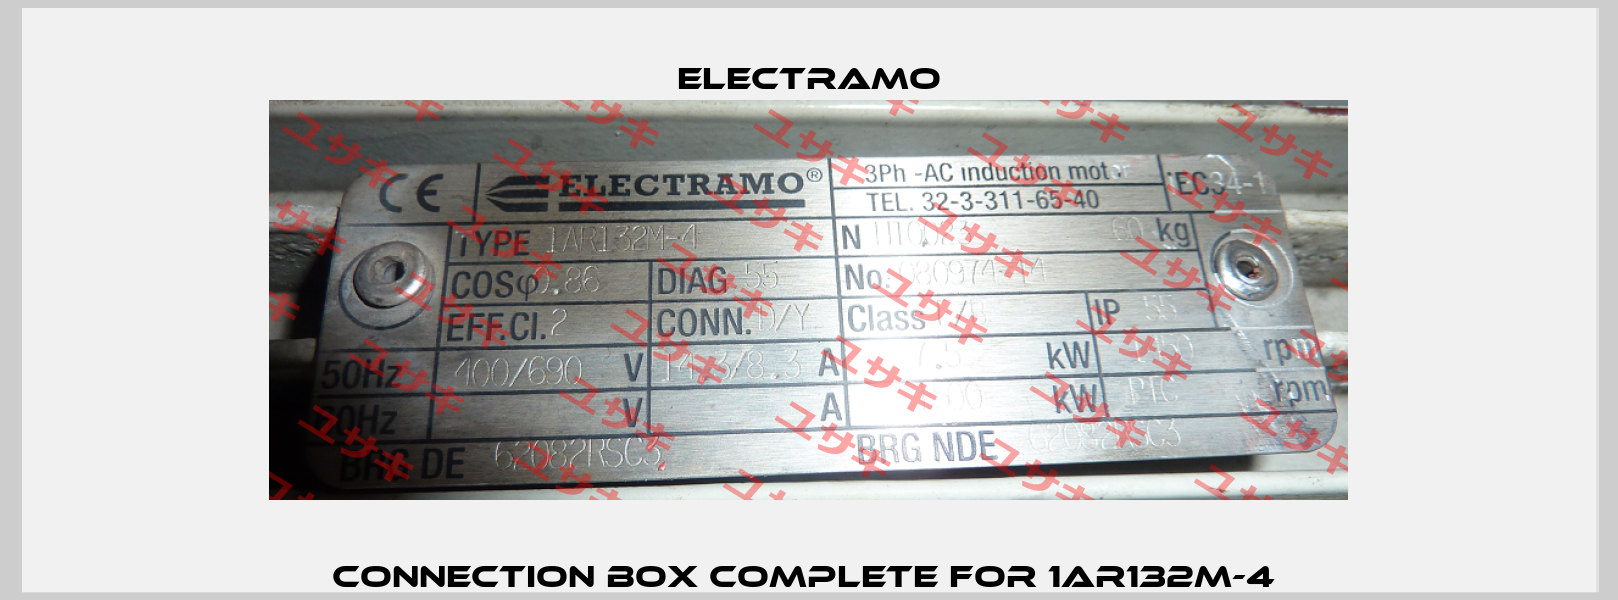 Connection box complete for 1AR132M-4  Electramo